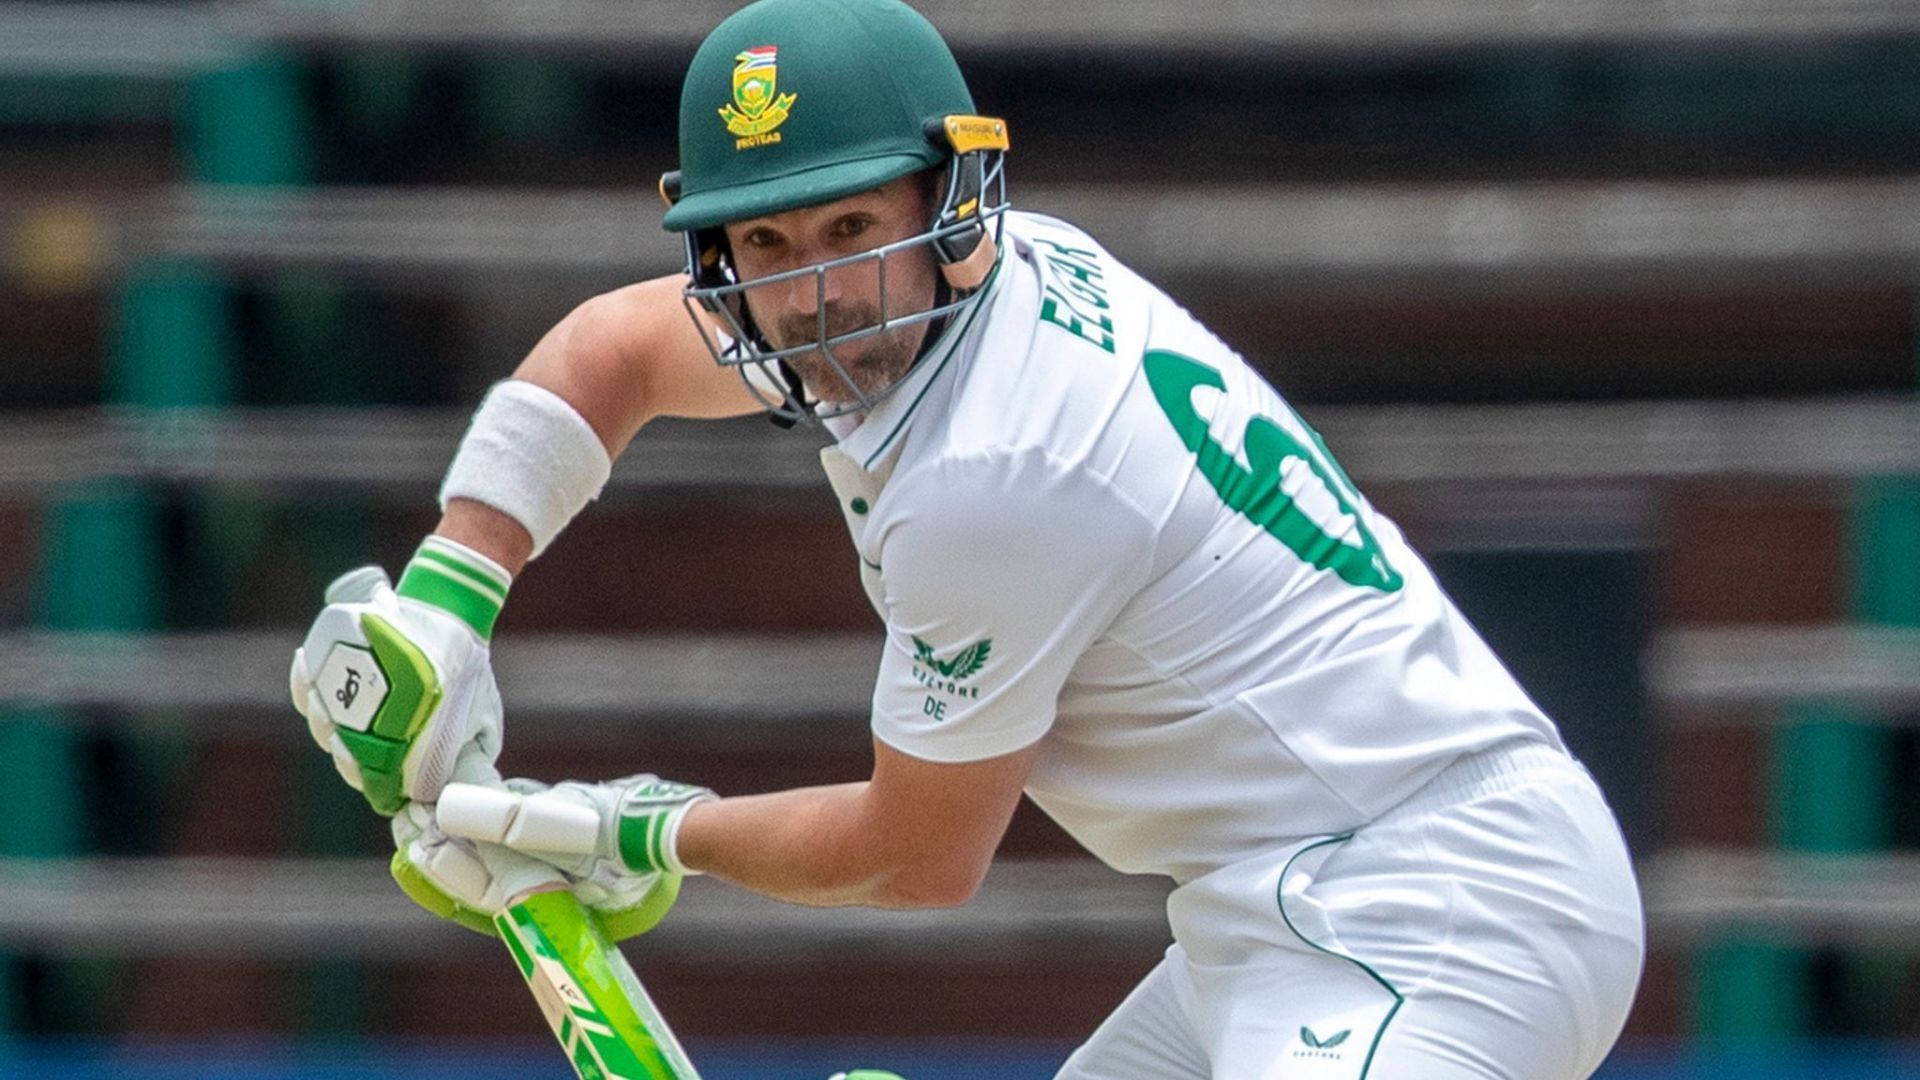 South Africa has found a very able leader in Dean Elgar